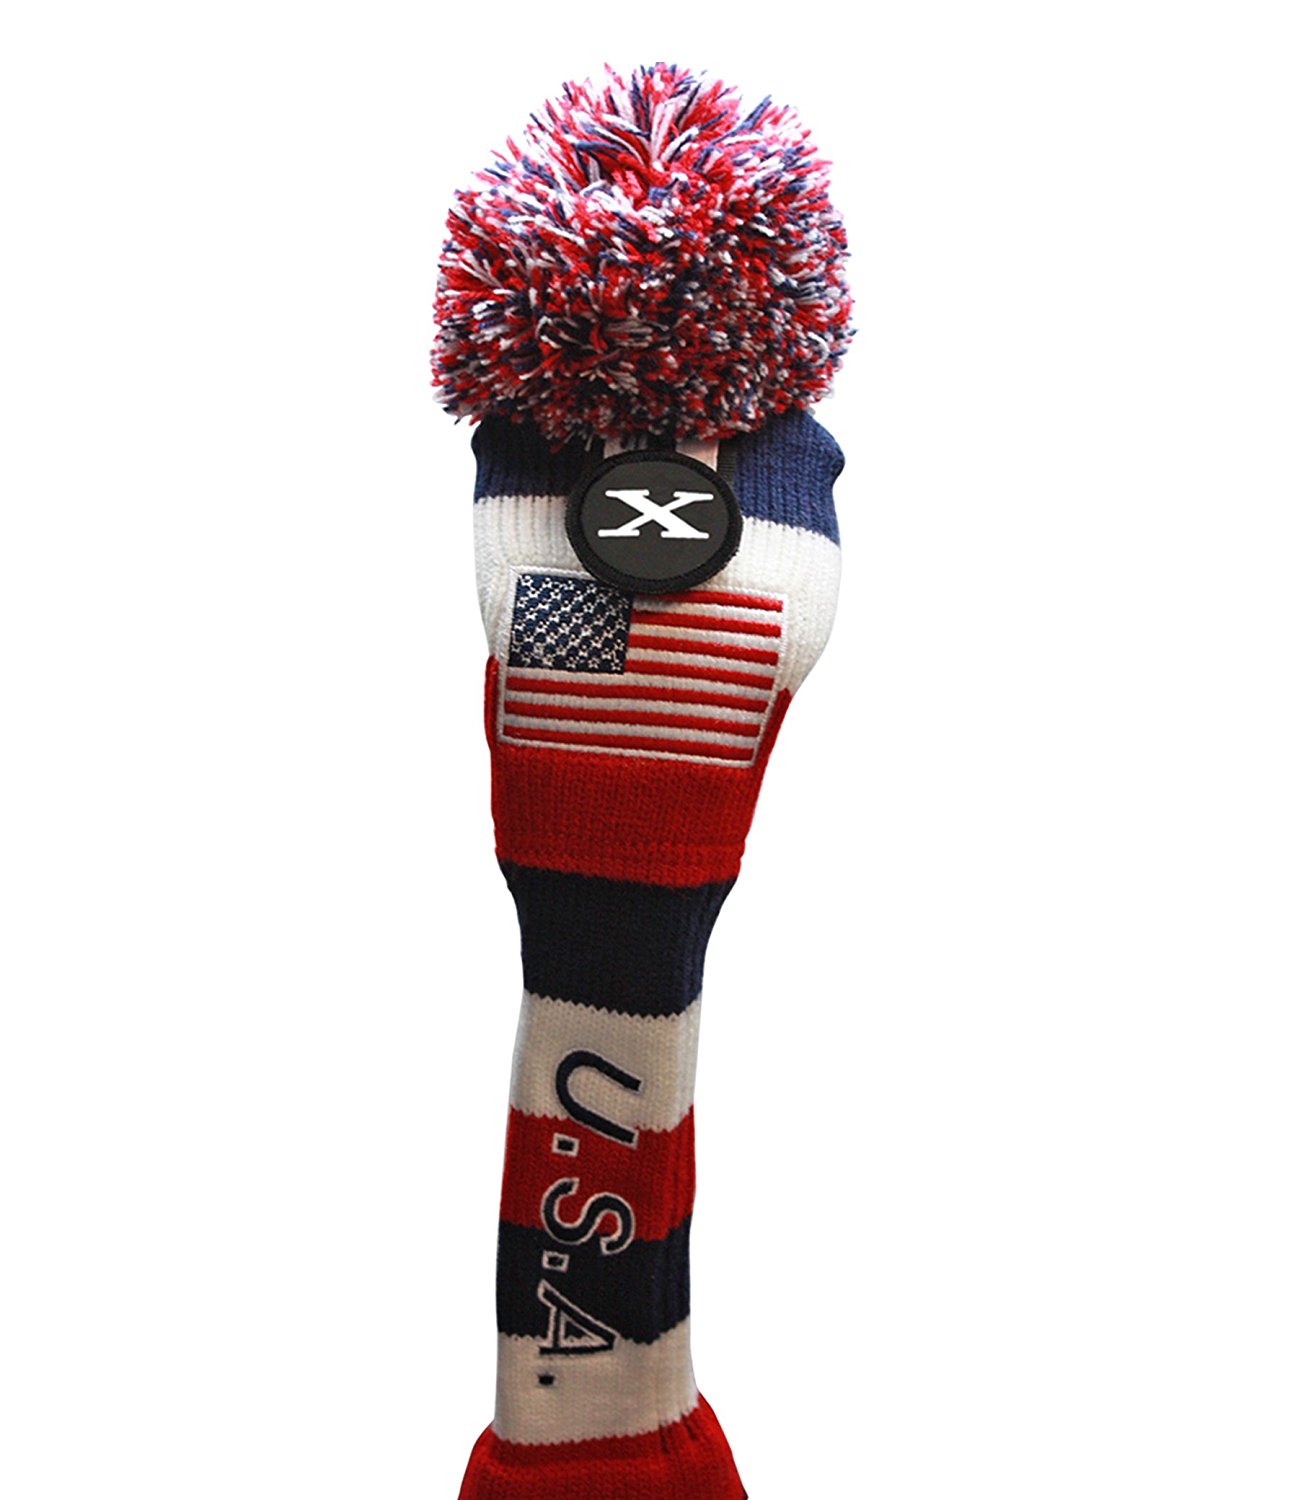 USA Majek Golf Driver 1 3 5 X Fairway Woods Headcovers Pom Pom Knit Limited Edition Vintage Classic Traditional Flag Stars Red White Blue Stripes Retro Head Cover Fits 460cc Drivers and 260cc Woods - image 5 of 8